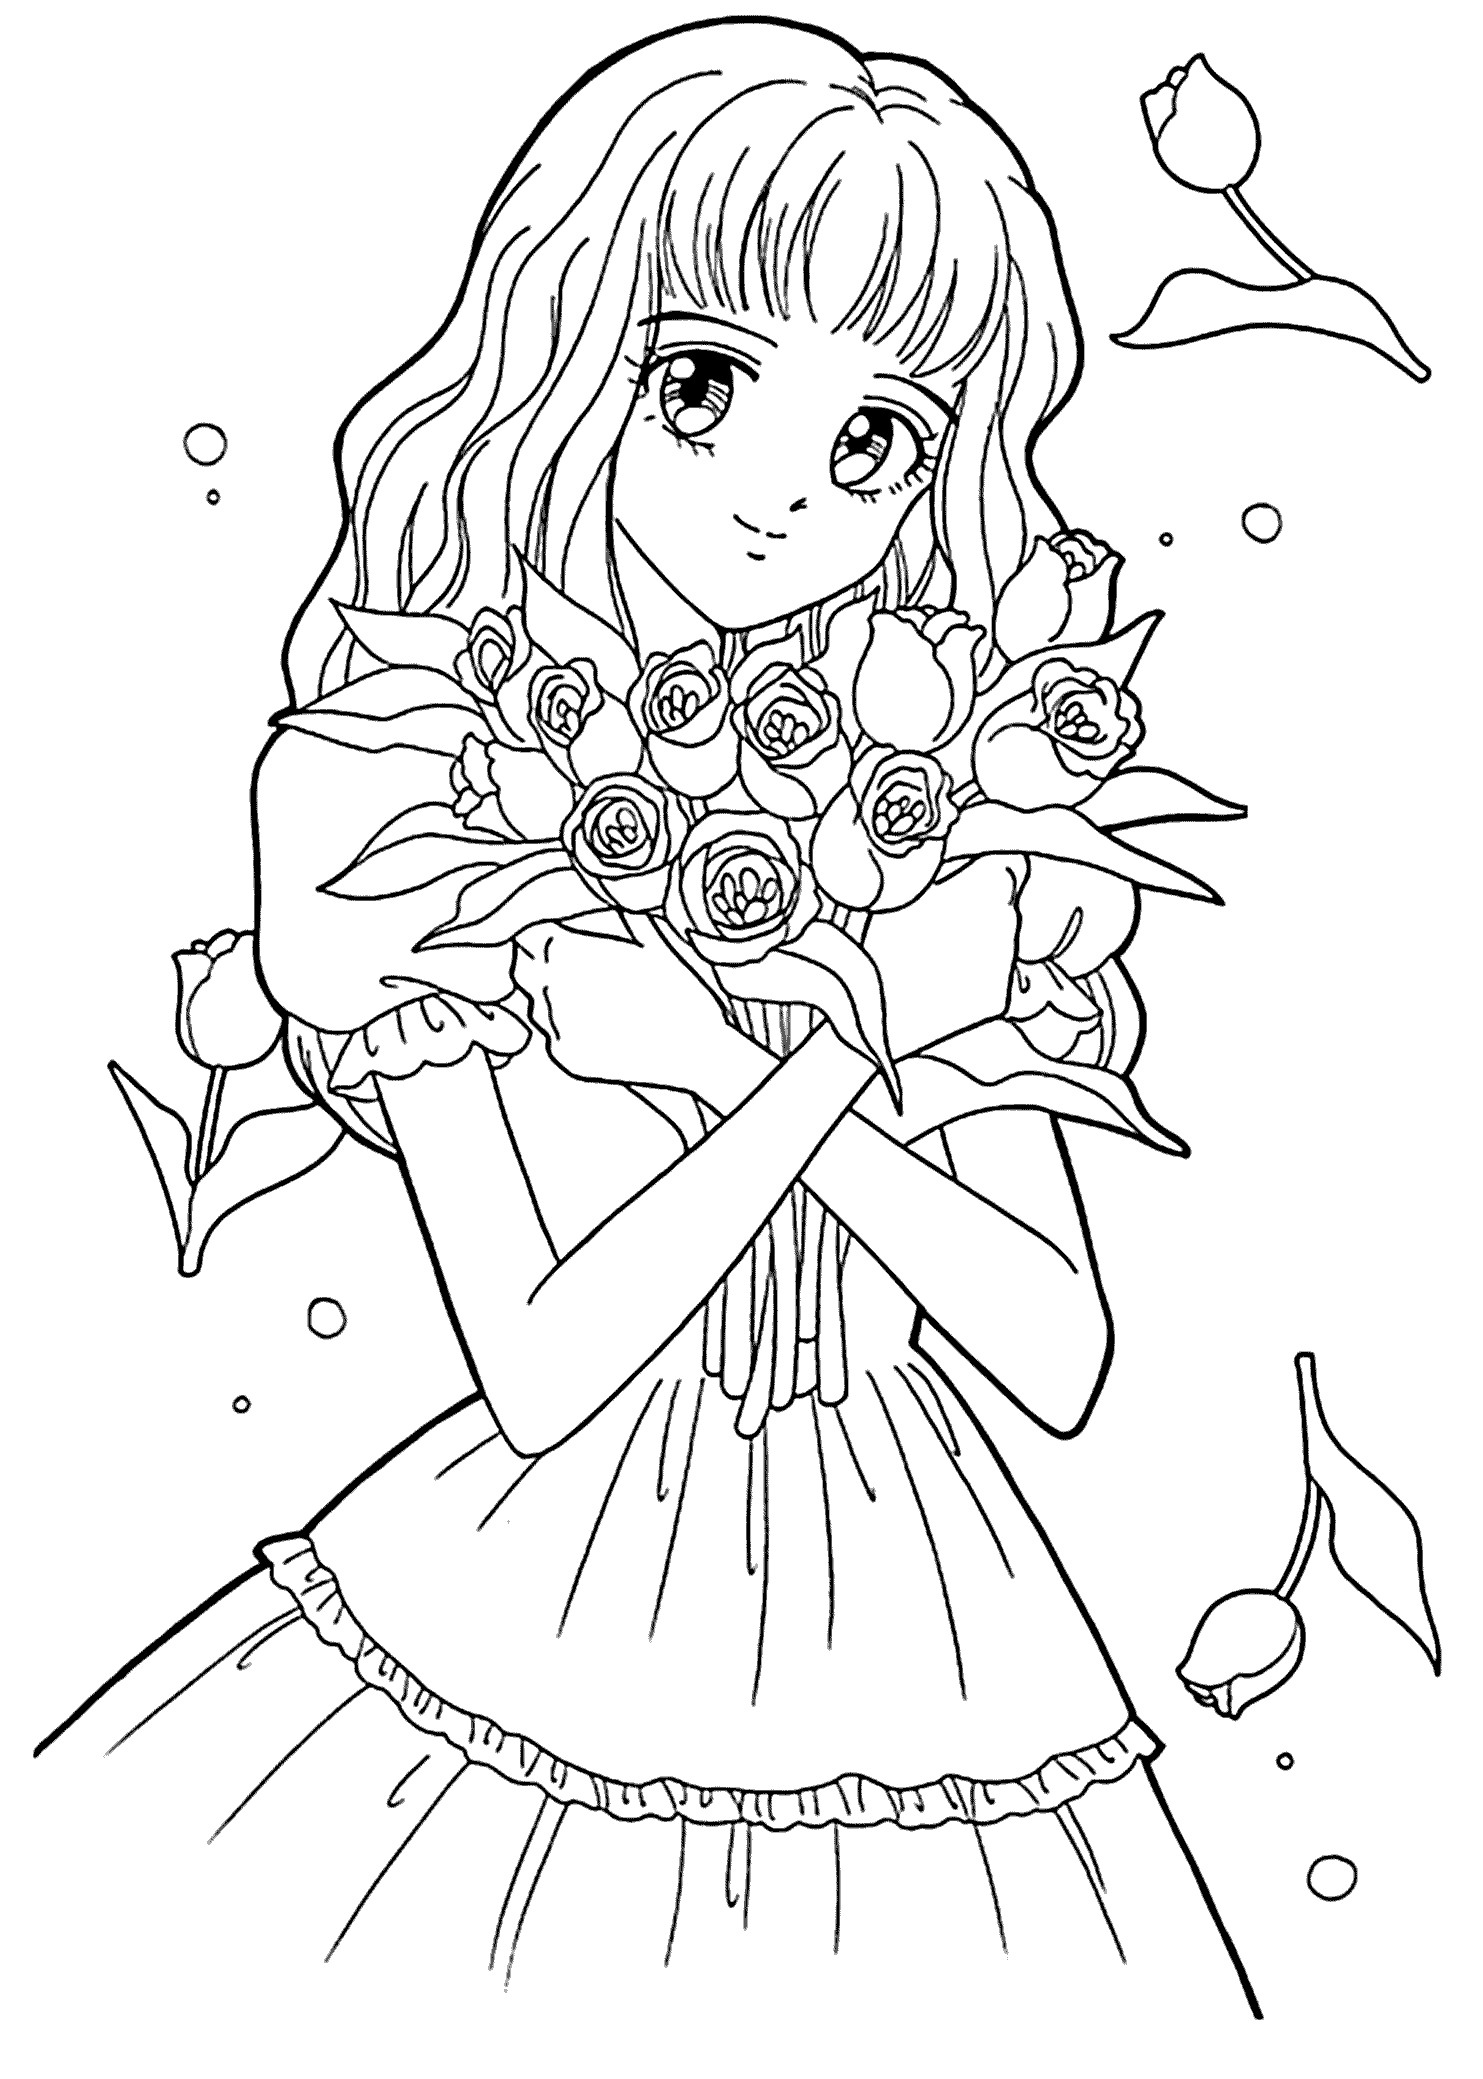 Coloring Pages For Girls Anime
 Coloring Pages for Girls Best Coloring Pages For Kids